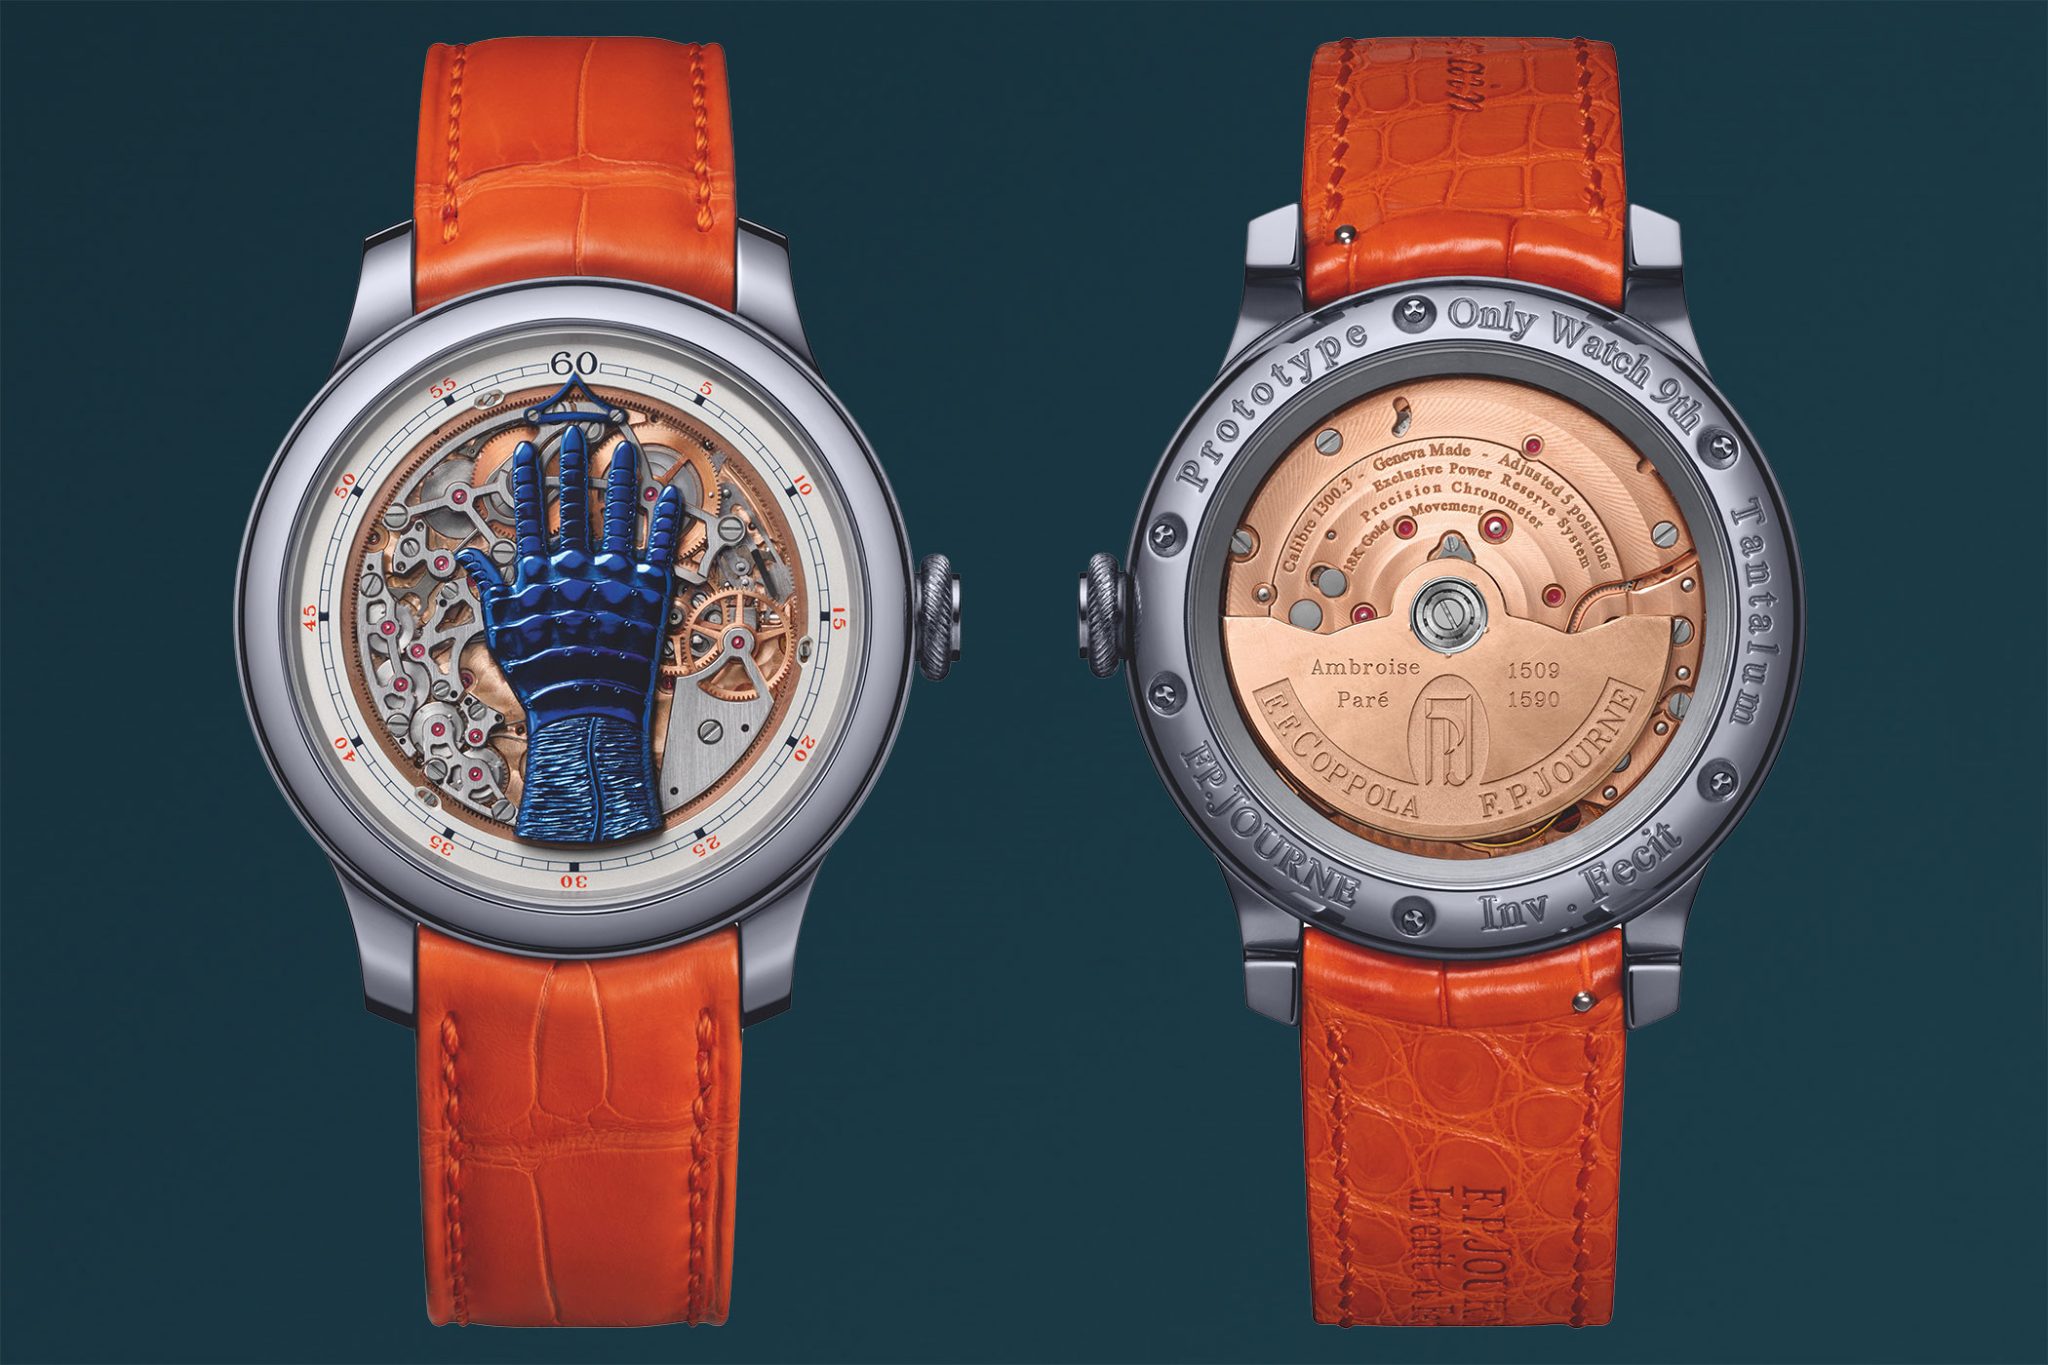 independent-watchmakers-fp-journe-francis-ford-coppola-ffc-blue-only-watch-2021